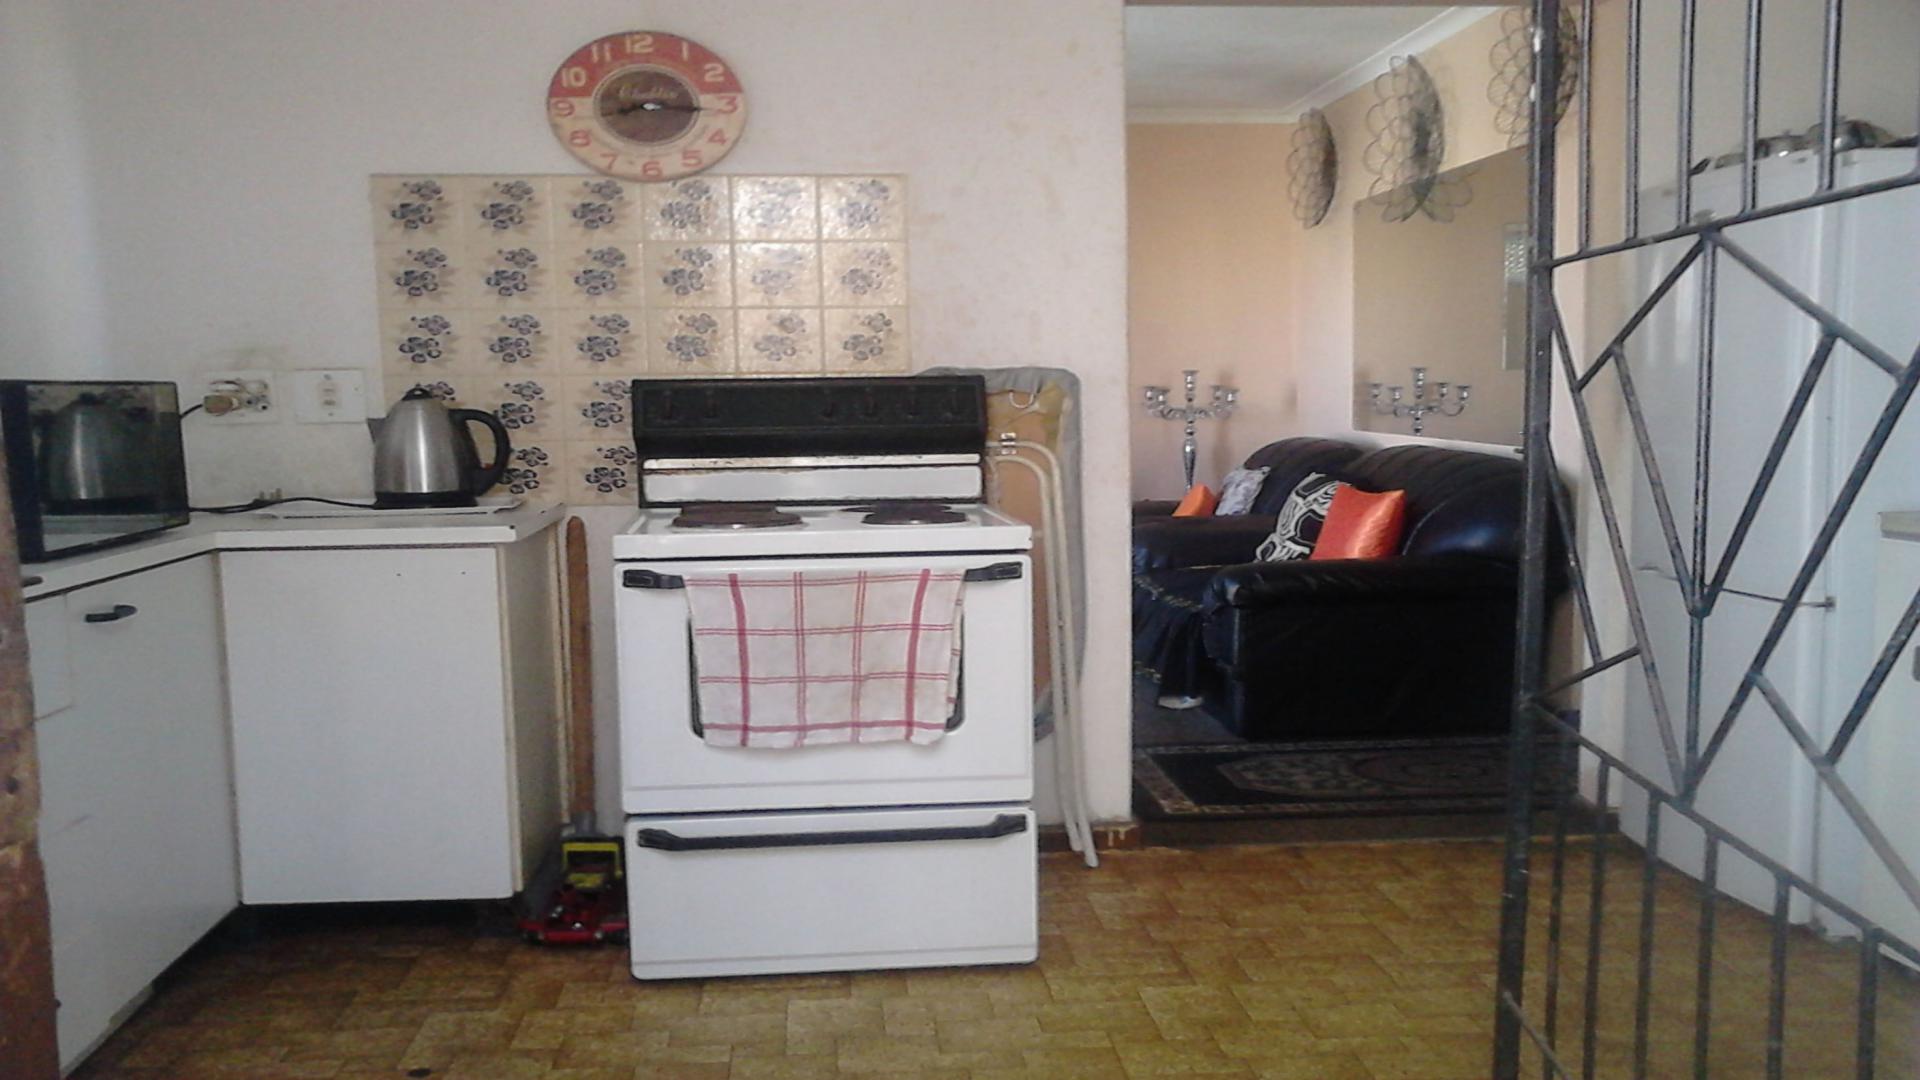 Kitchen - 8 square meters of property in New Eastridge